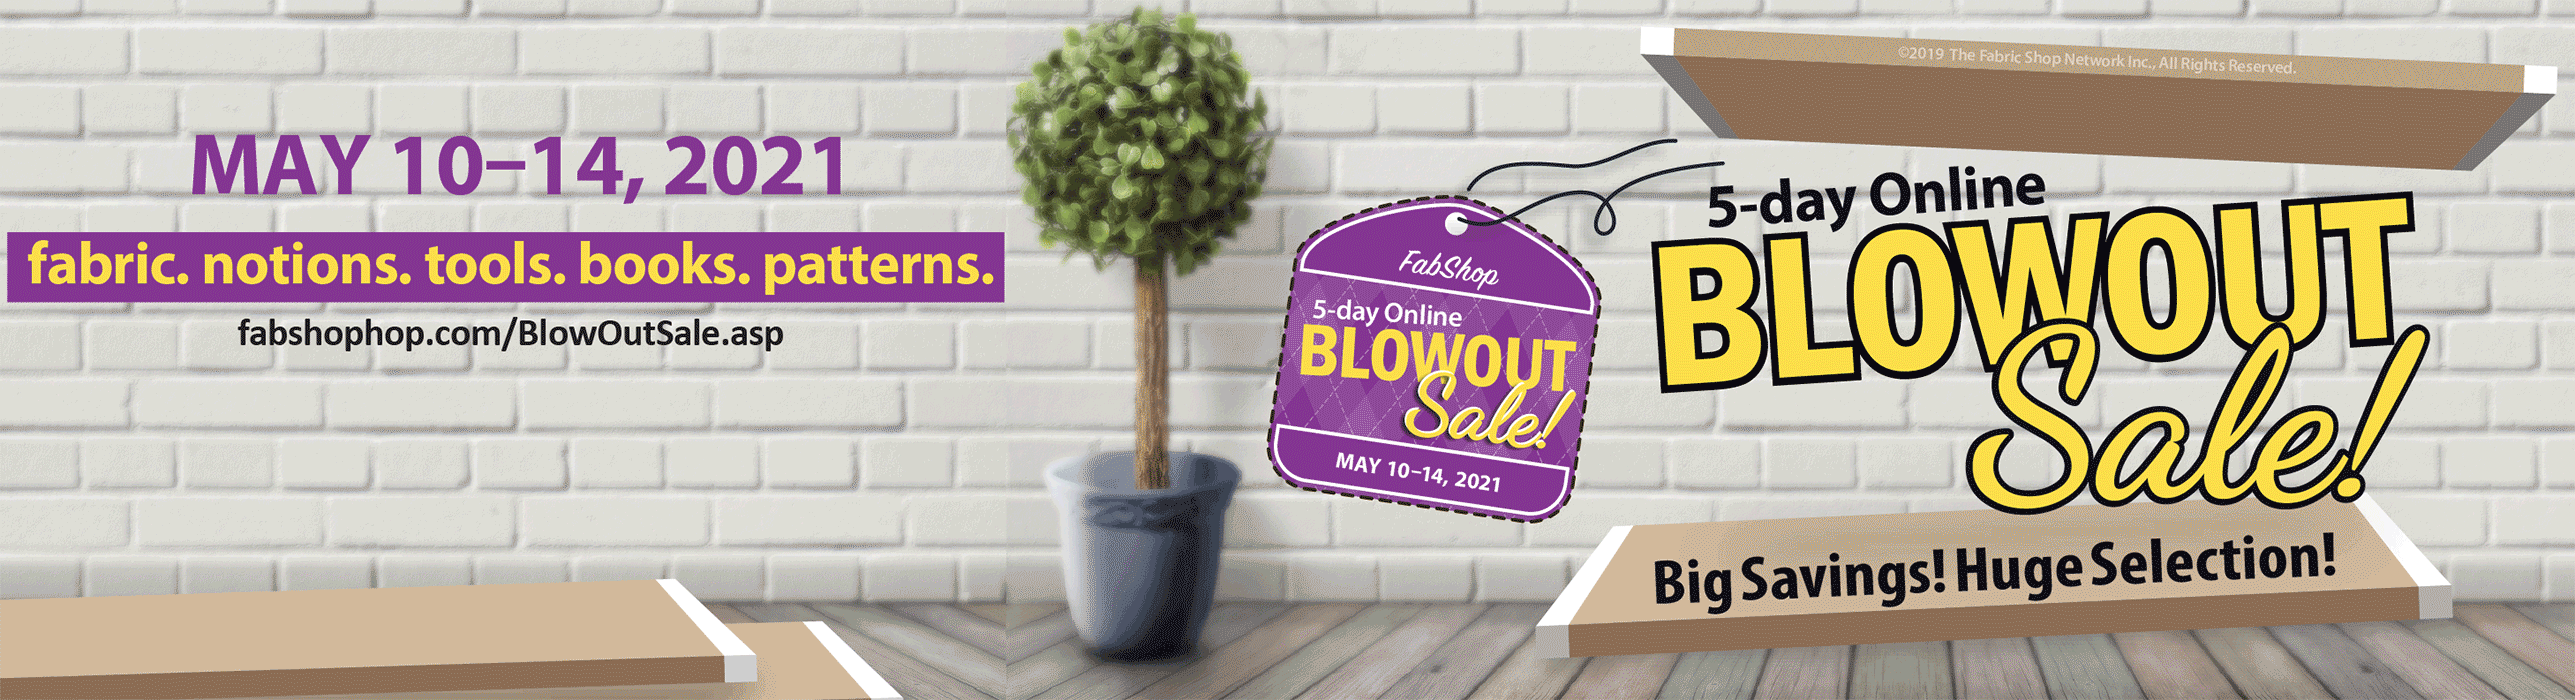 BlowOut Sale - May 10-14, 2021